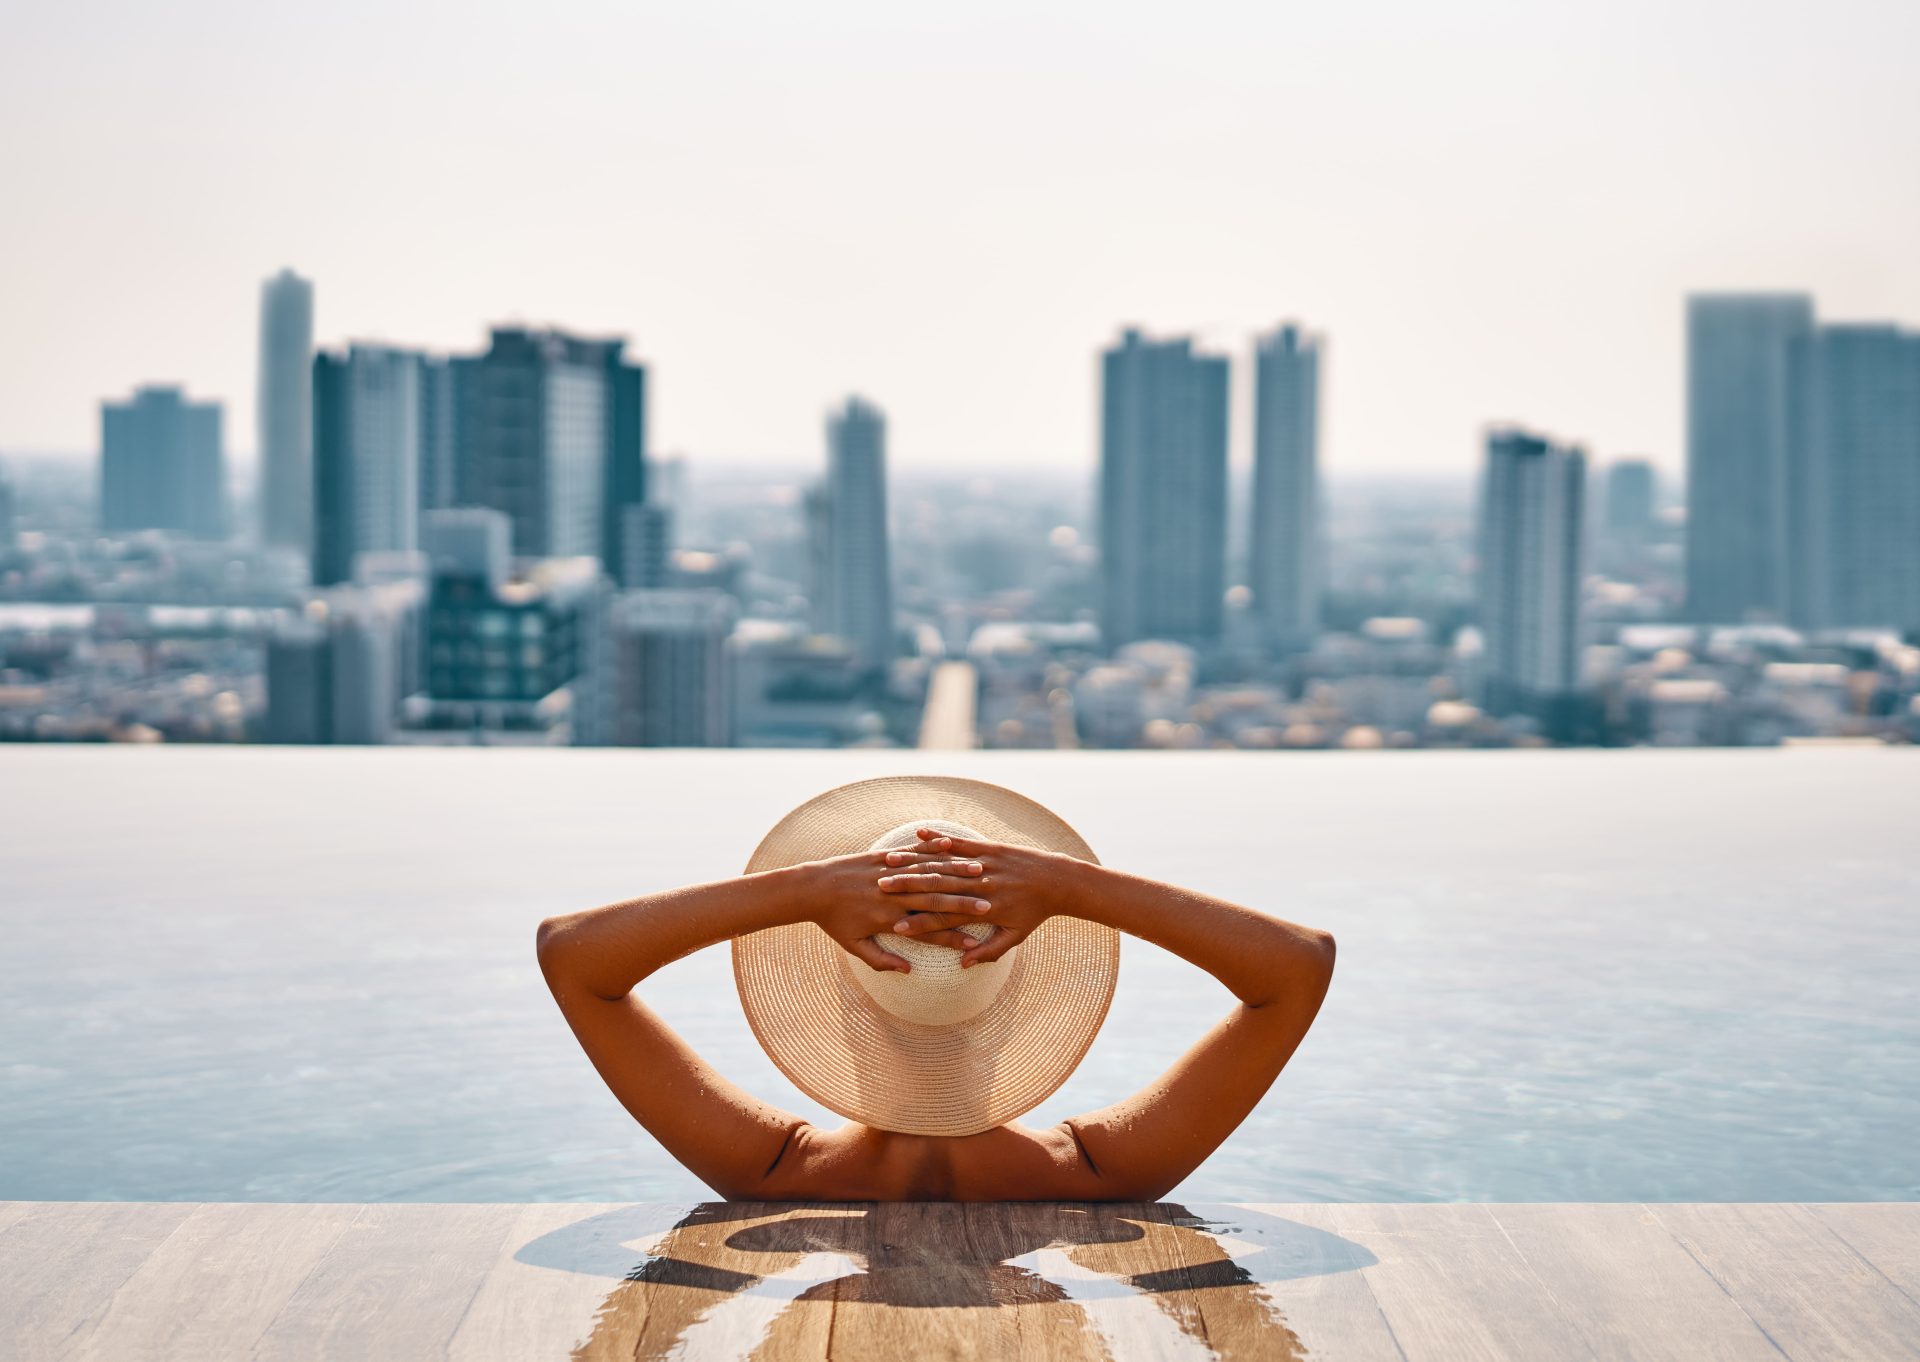 Image of a woman with a hat on, enjoying the cityscape with a view from her own private pool.